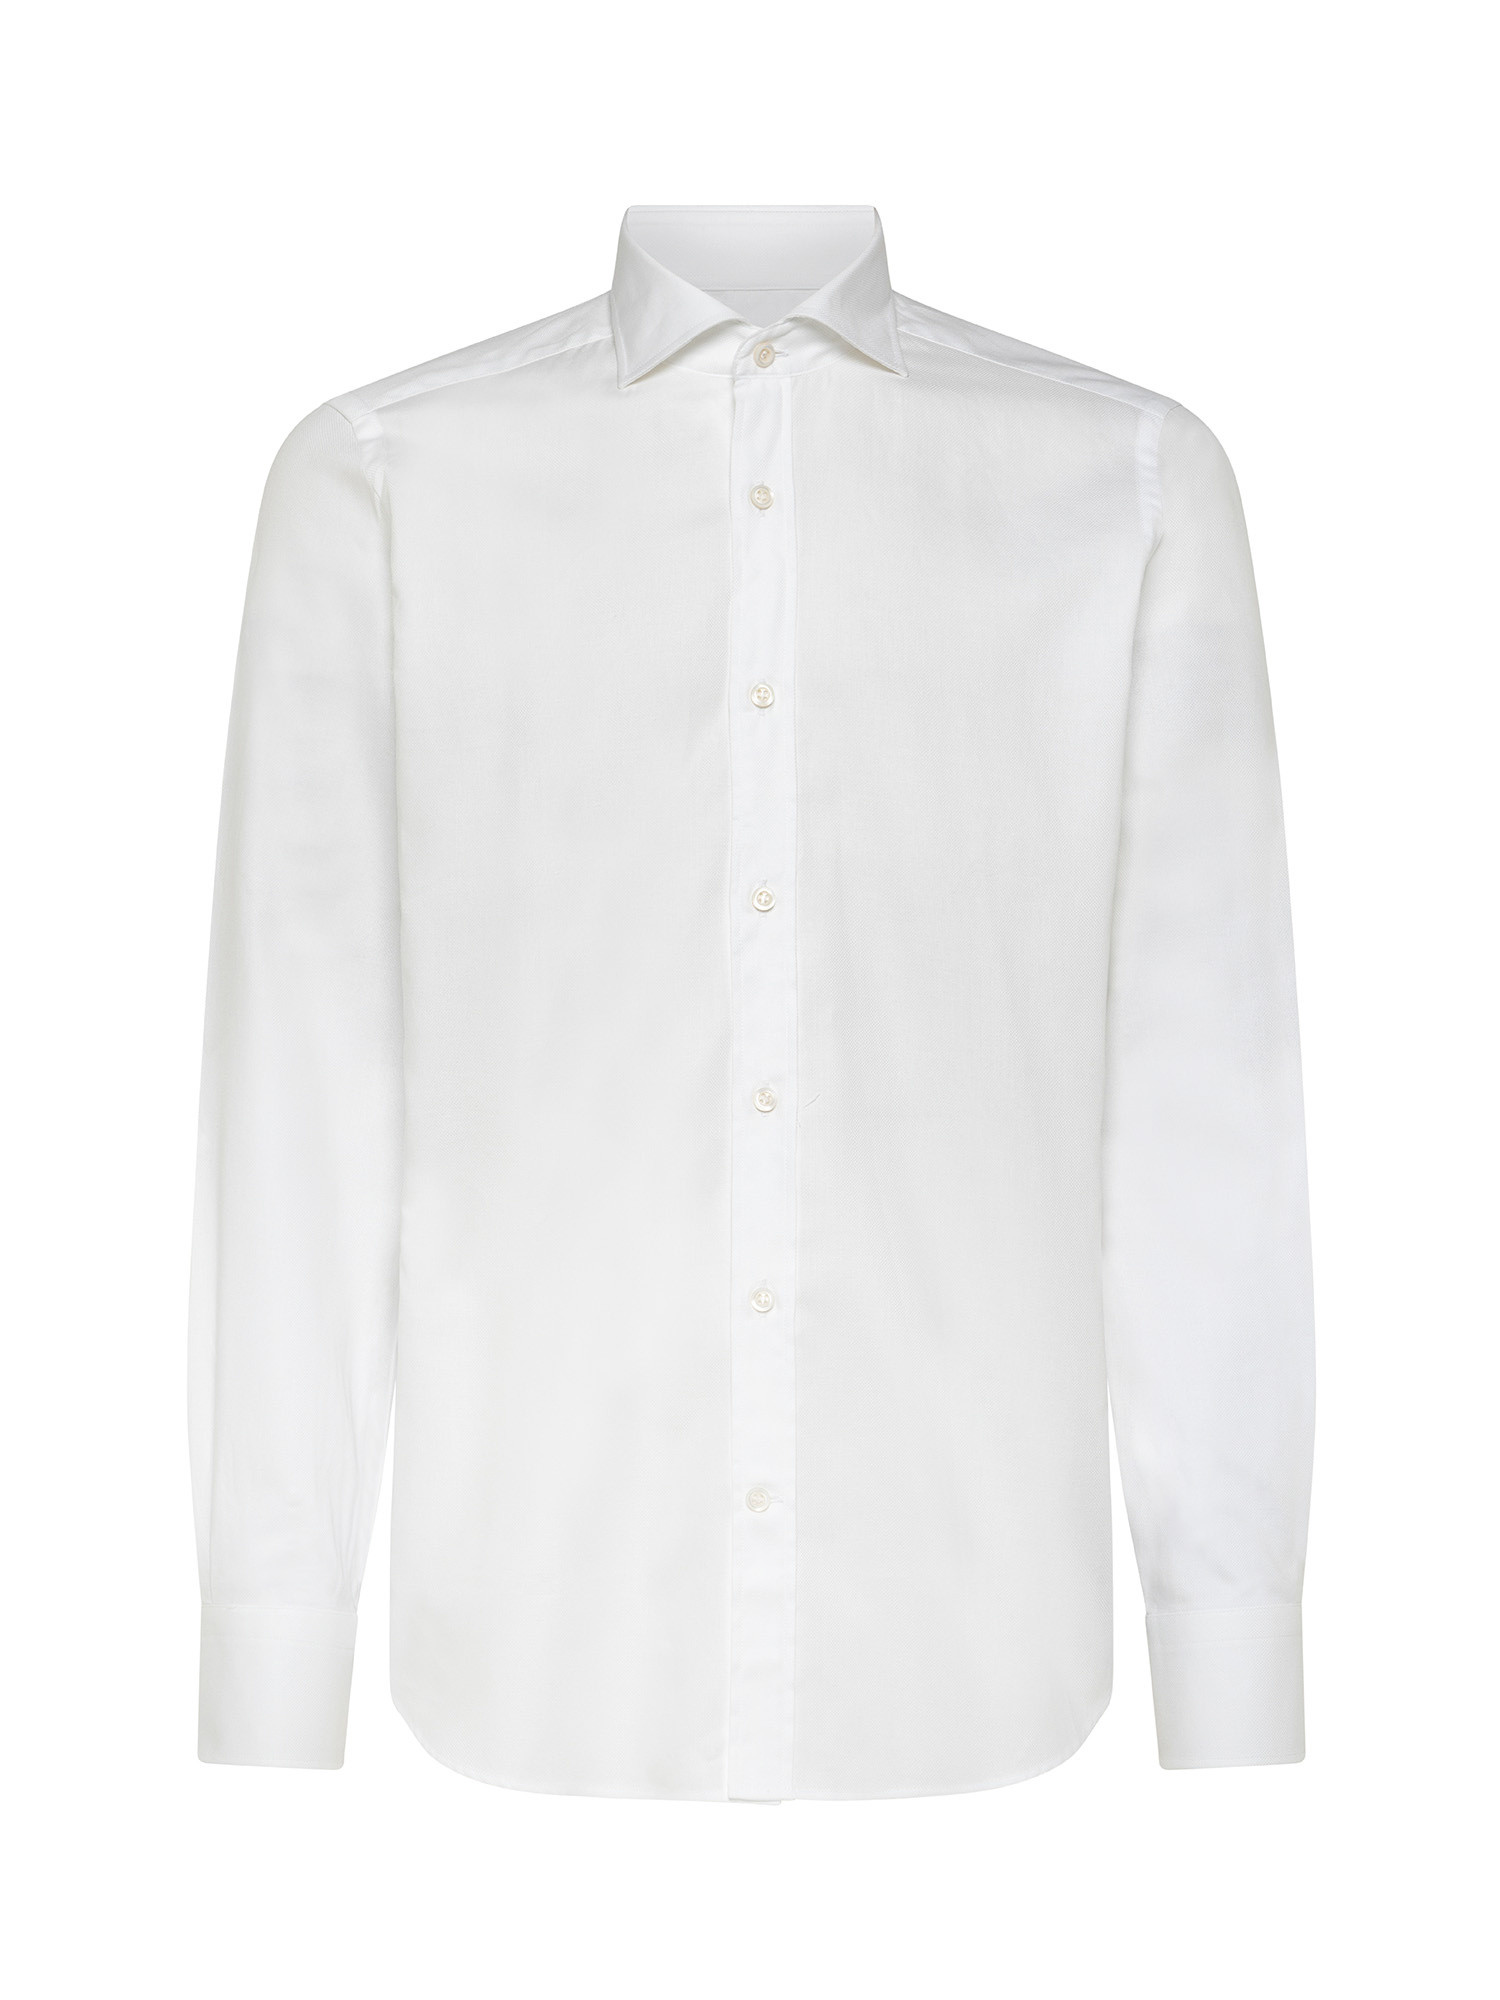 Slim fit shirt in pure cotton, White Cream, large image number 1